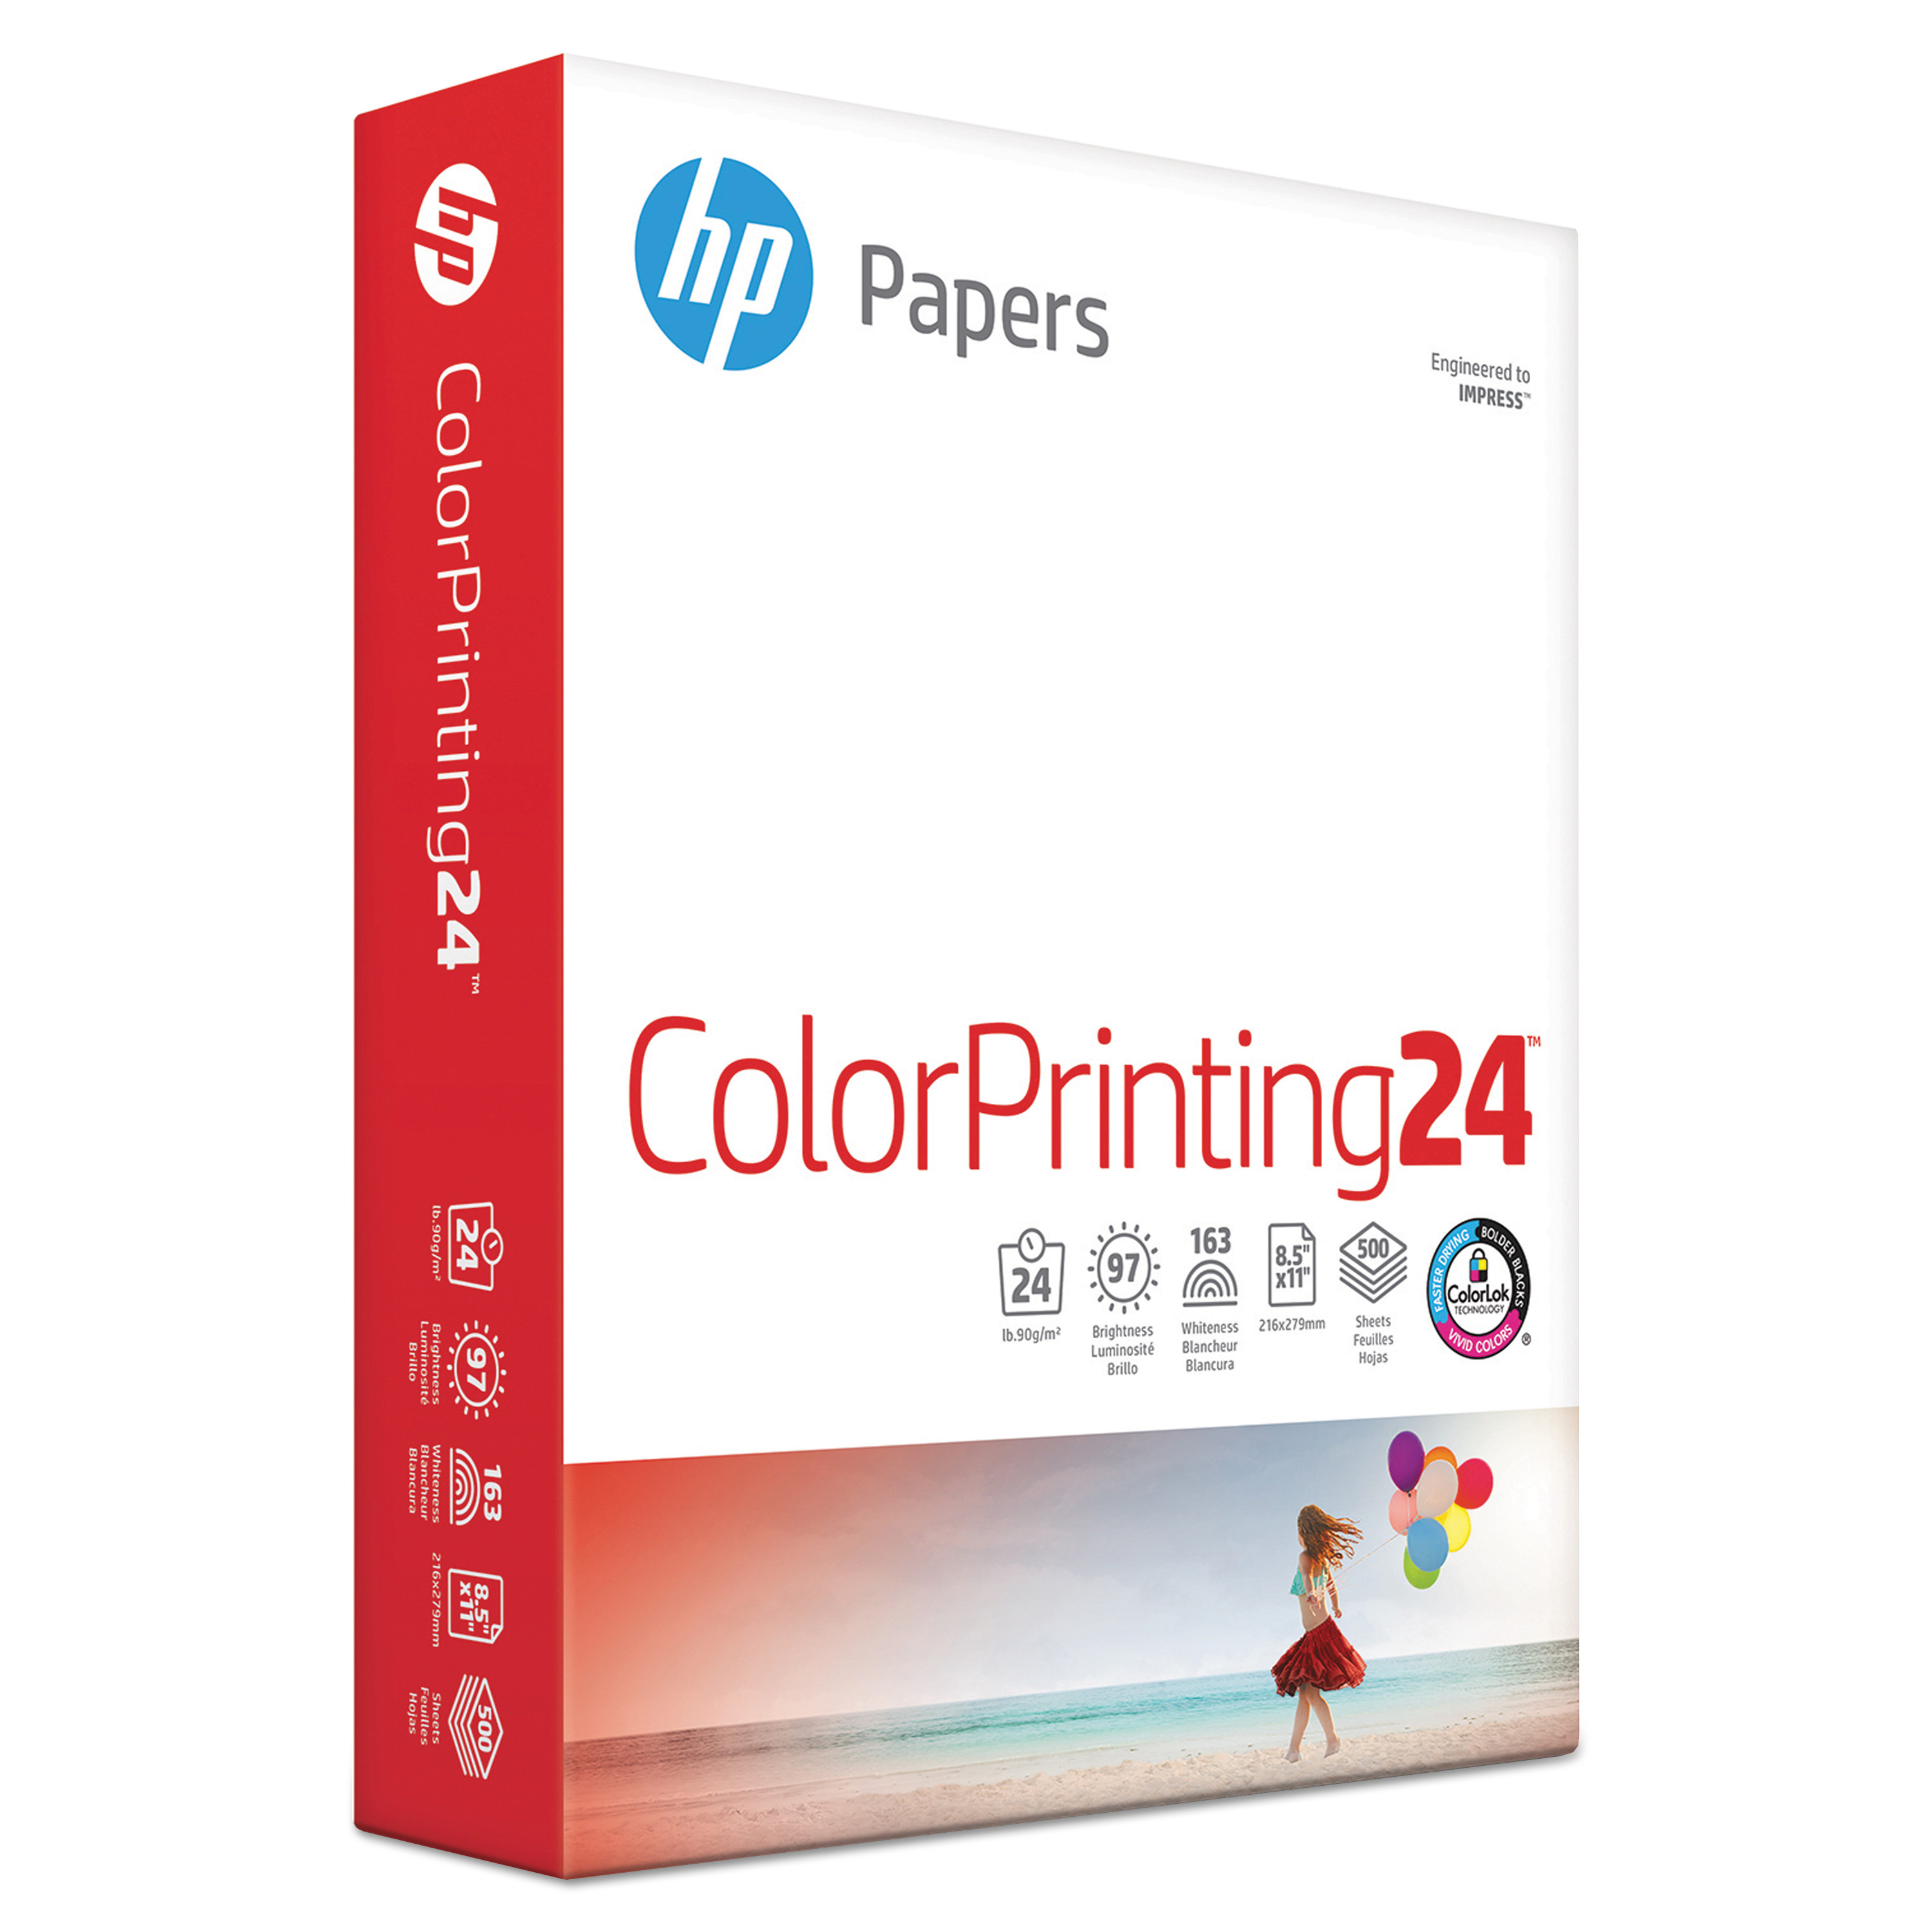  HP Papers 20200-0 ColorPrinting24 Paper, 97 Bright, 24lb, 8.5 x 11, White, 500/Ream (HEW202000) 